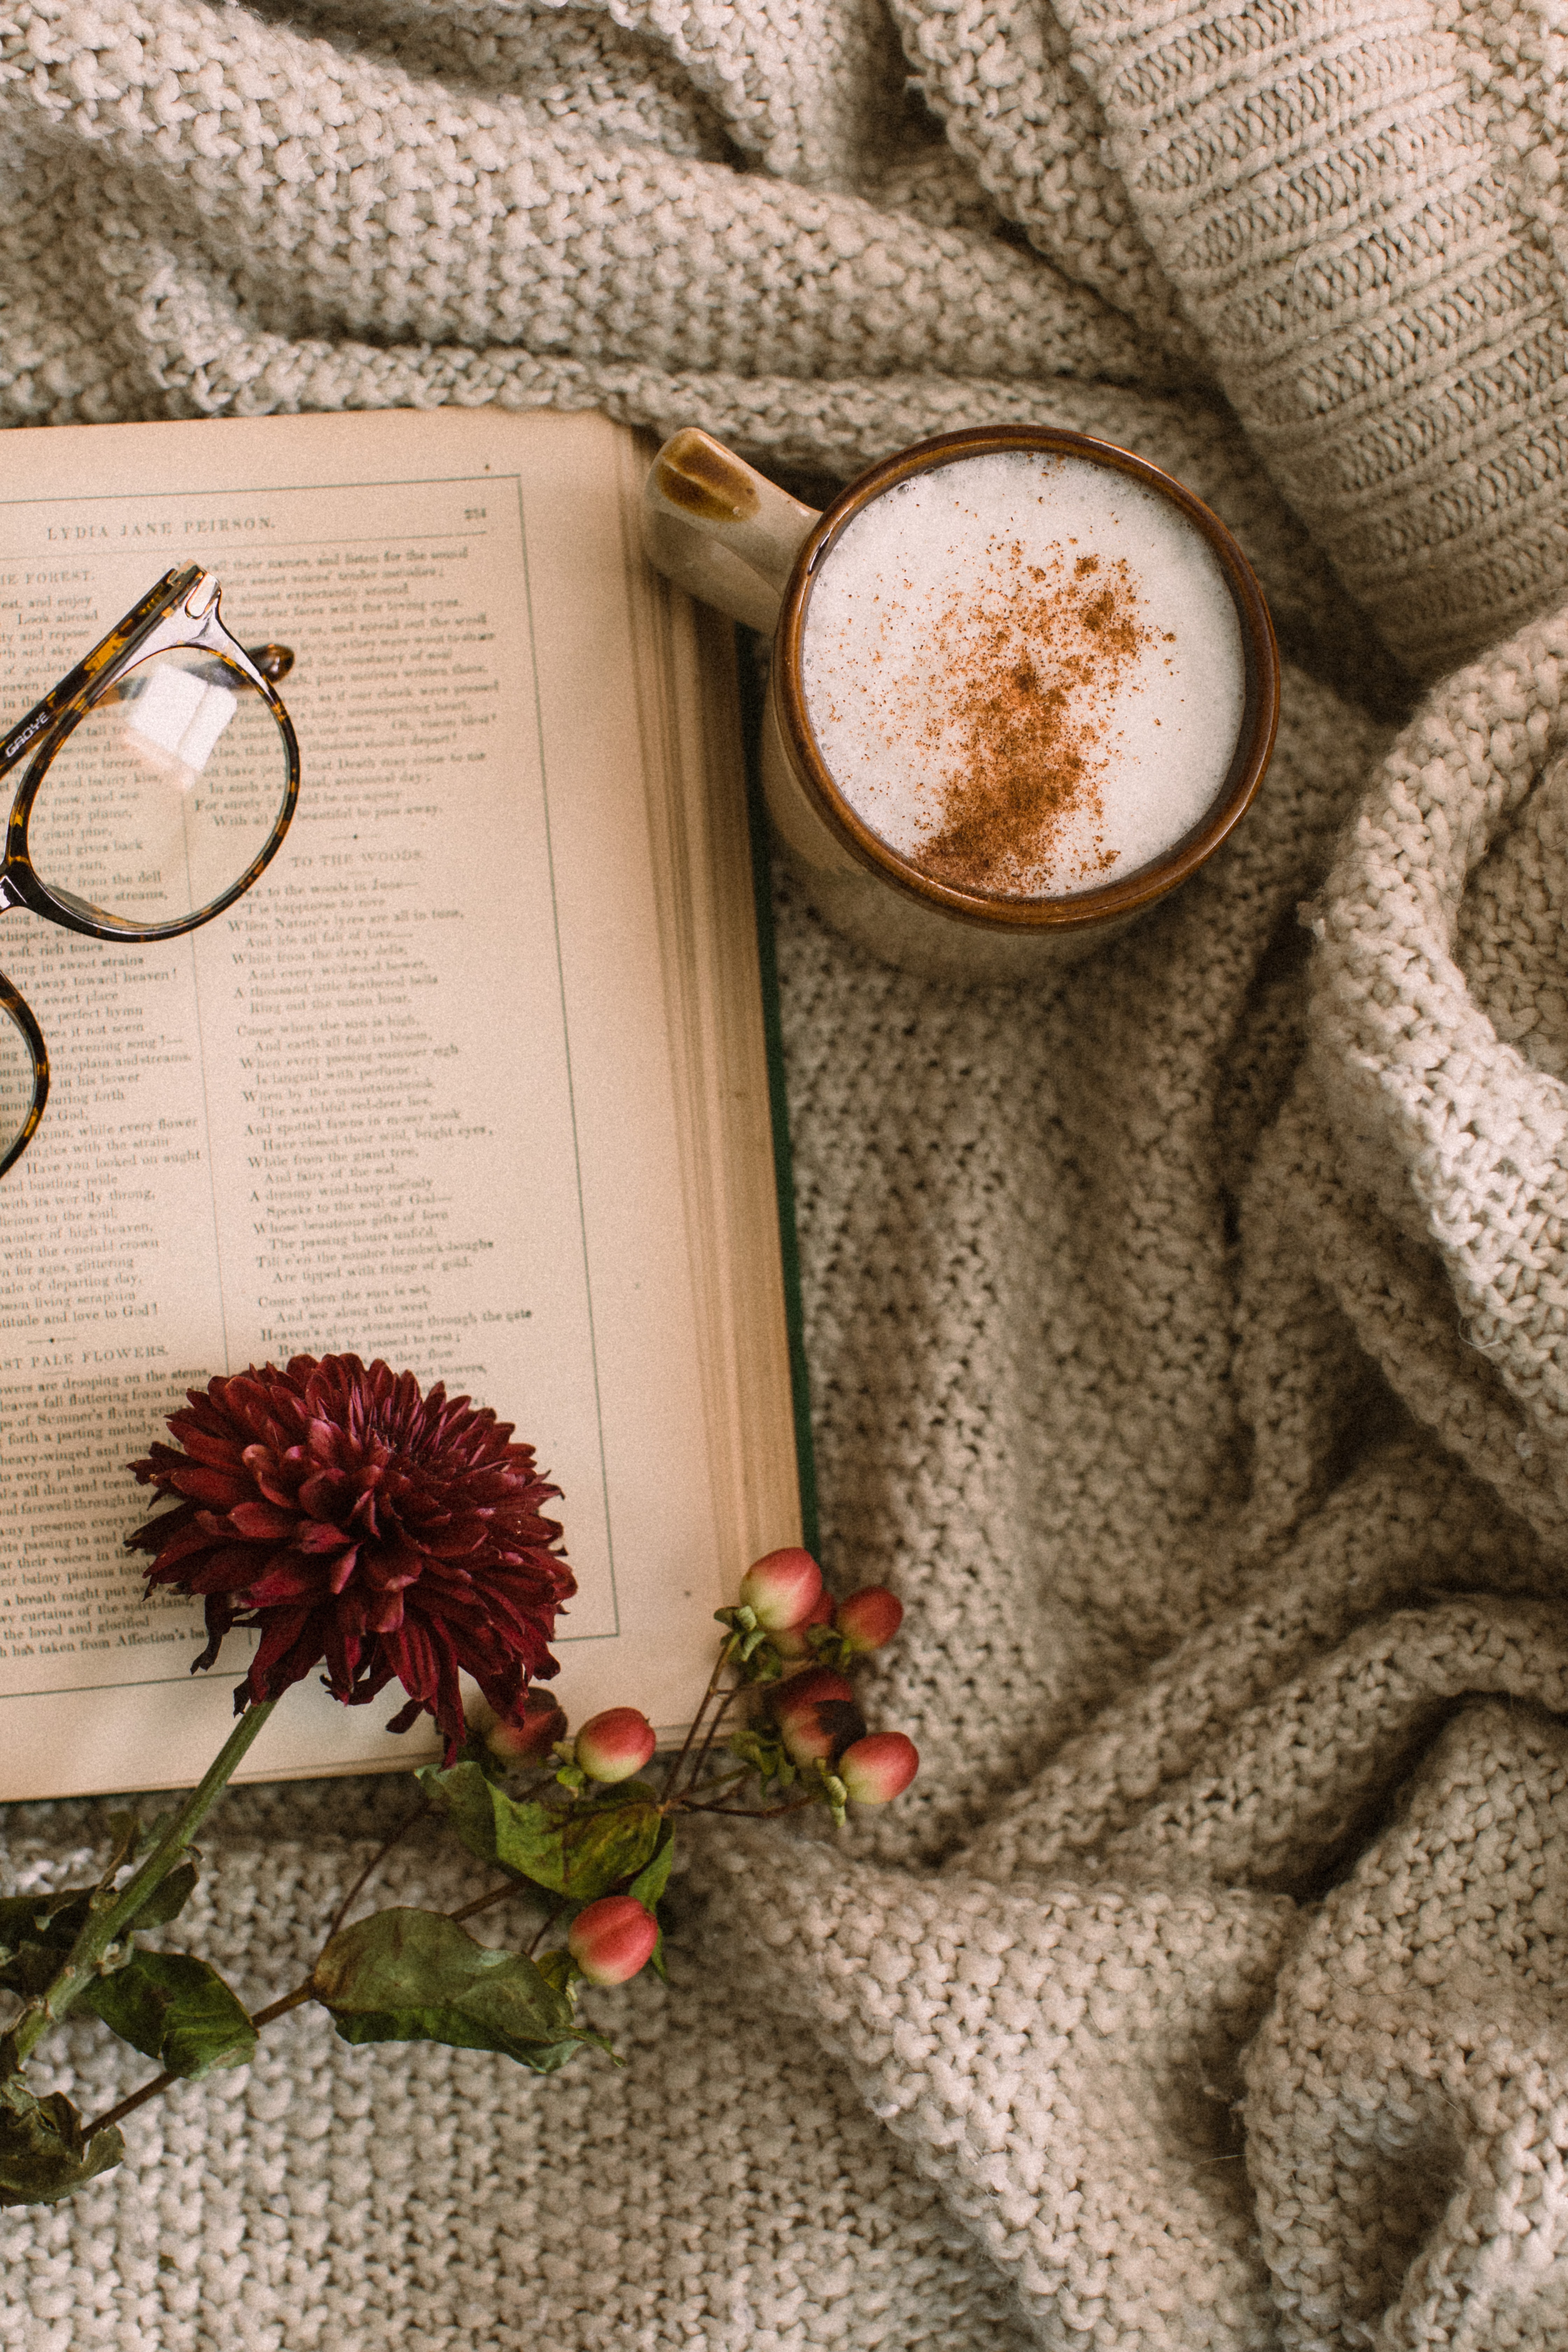 book, food, cup, spectacles, flowers, coffee, cappuccino, glasses, mug